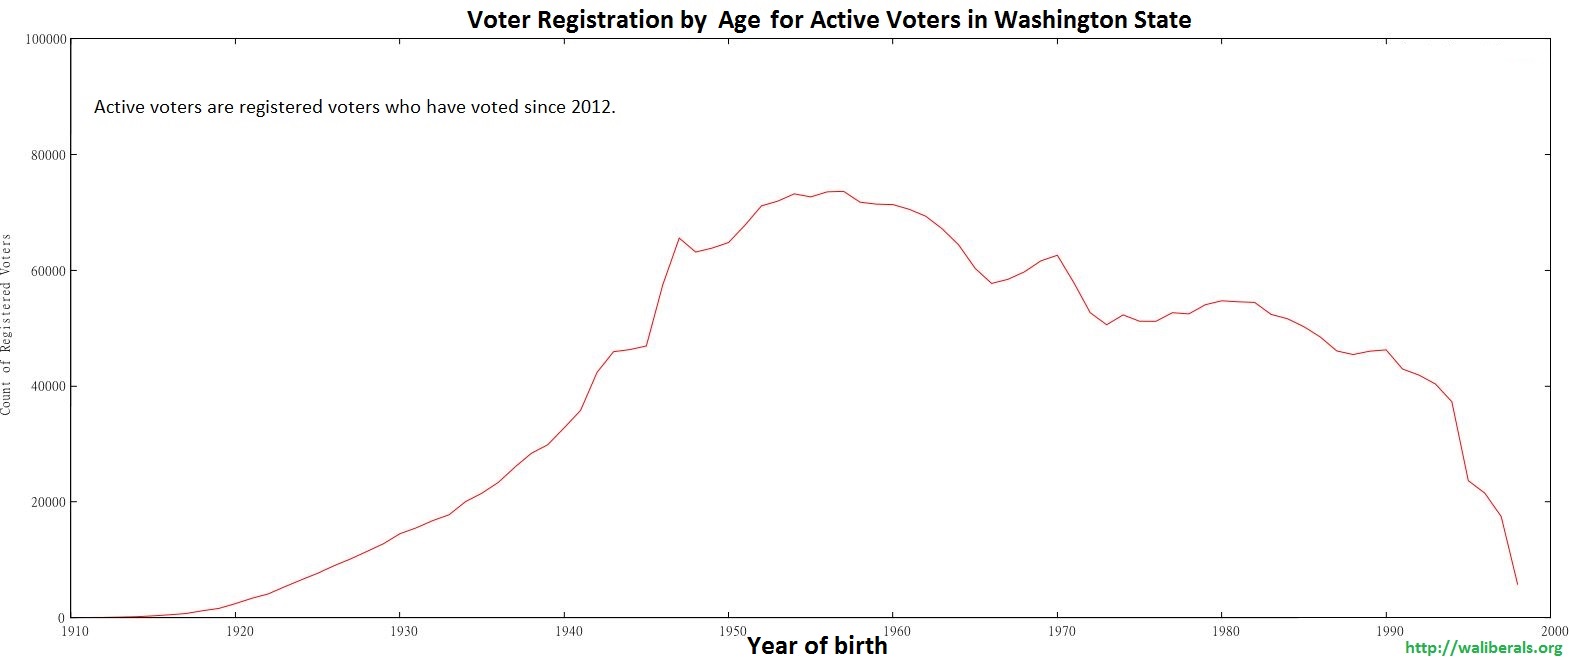 Voter Registration in Washington State, for active voters